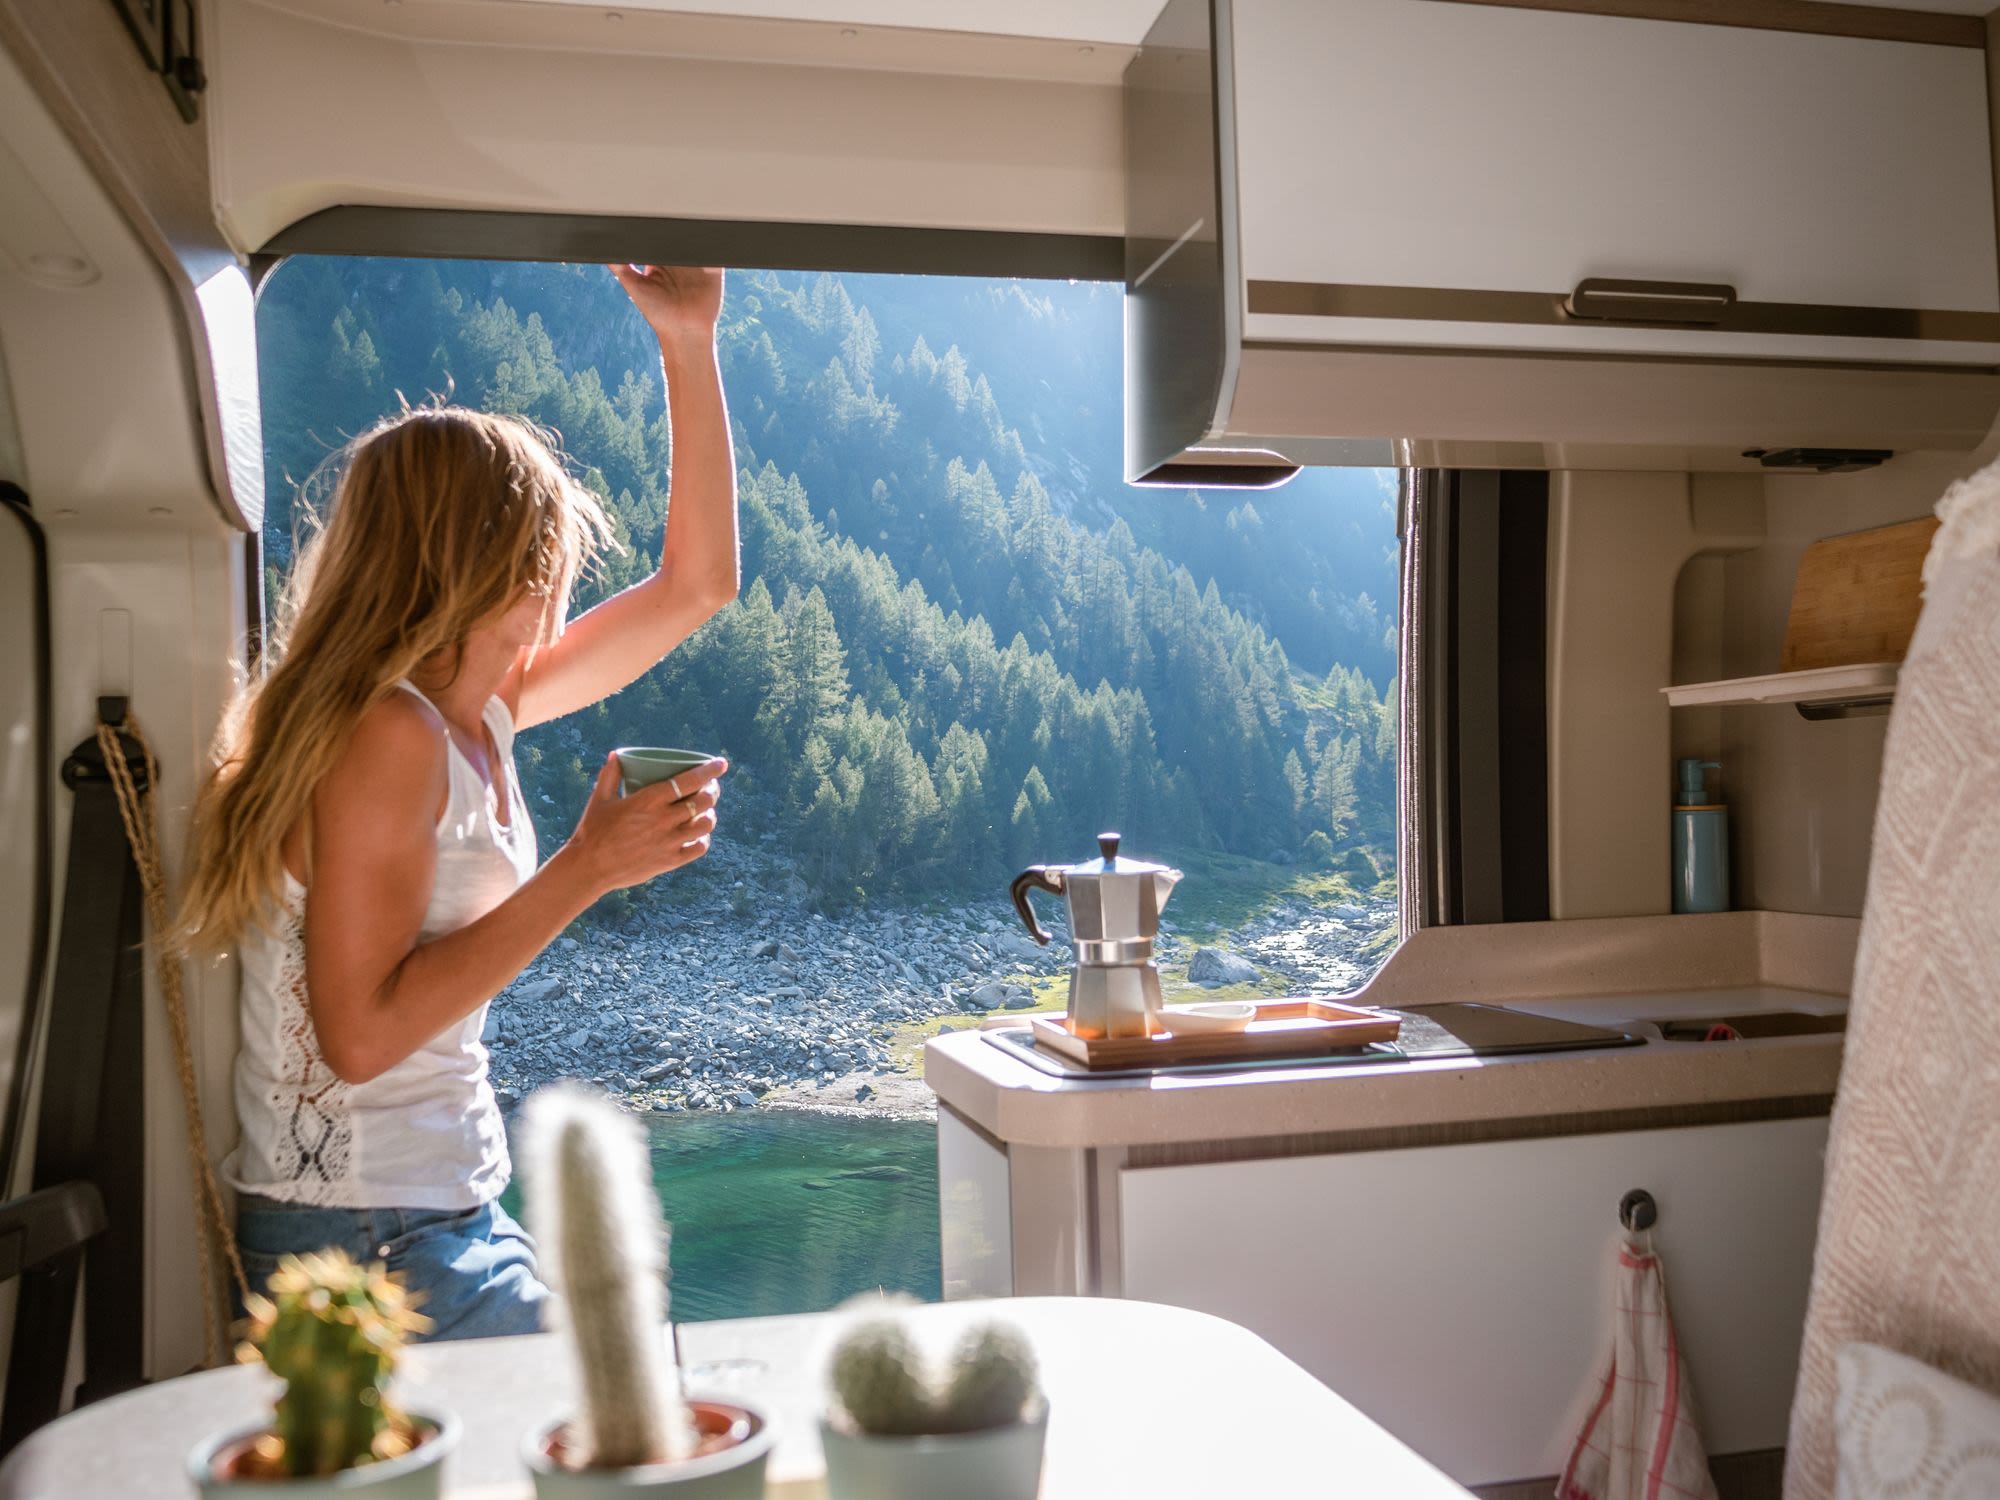 Summer fun: top tips for camping and living the van life